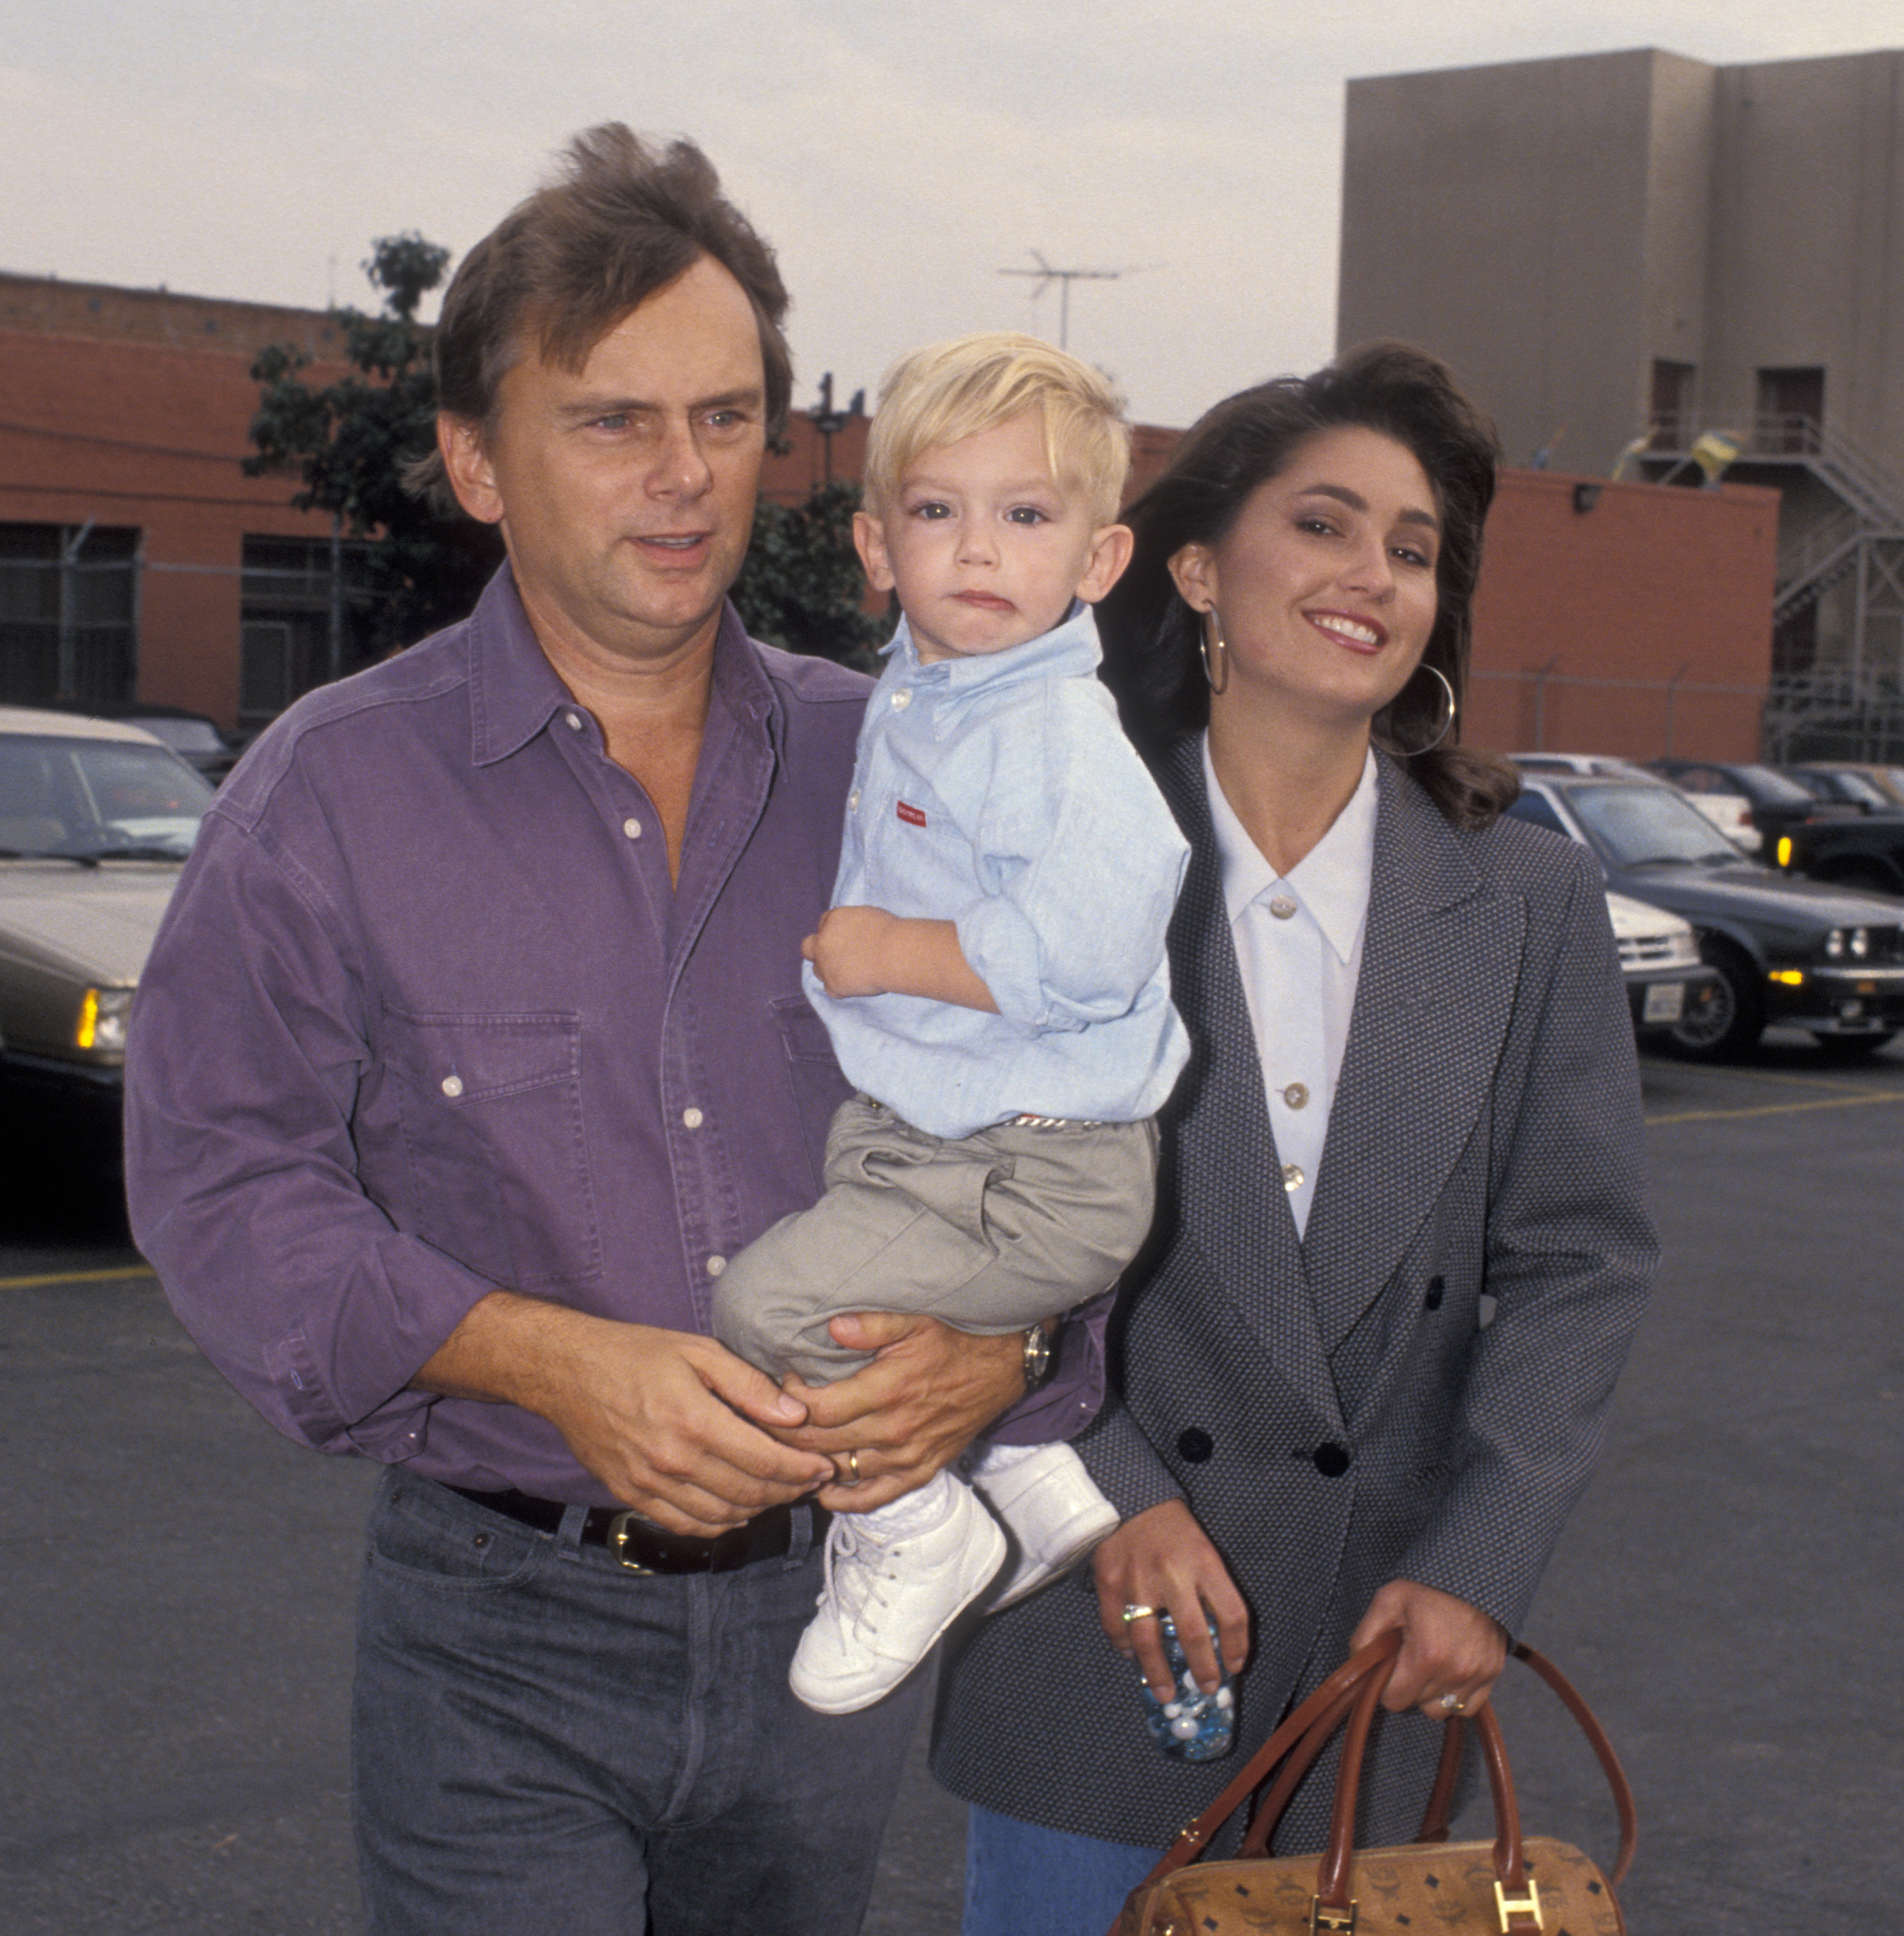 Pat Sajak, Lesly Brown, and their son, Patrick at the "Aladdin" premiere on November 8, 1992 | Source: Getty Images